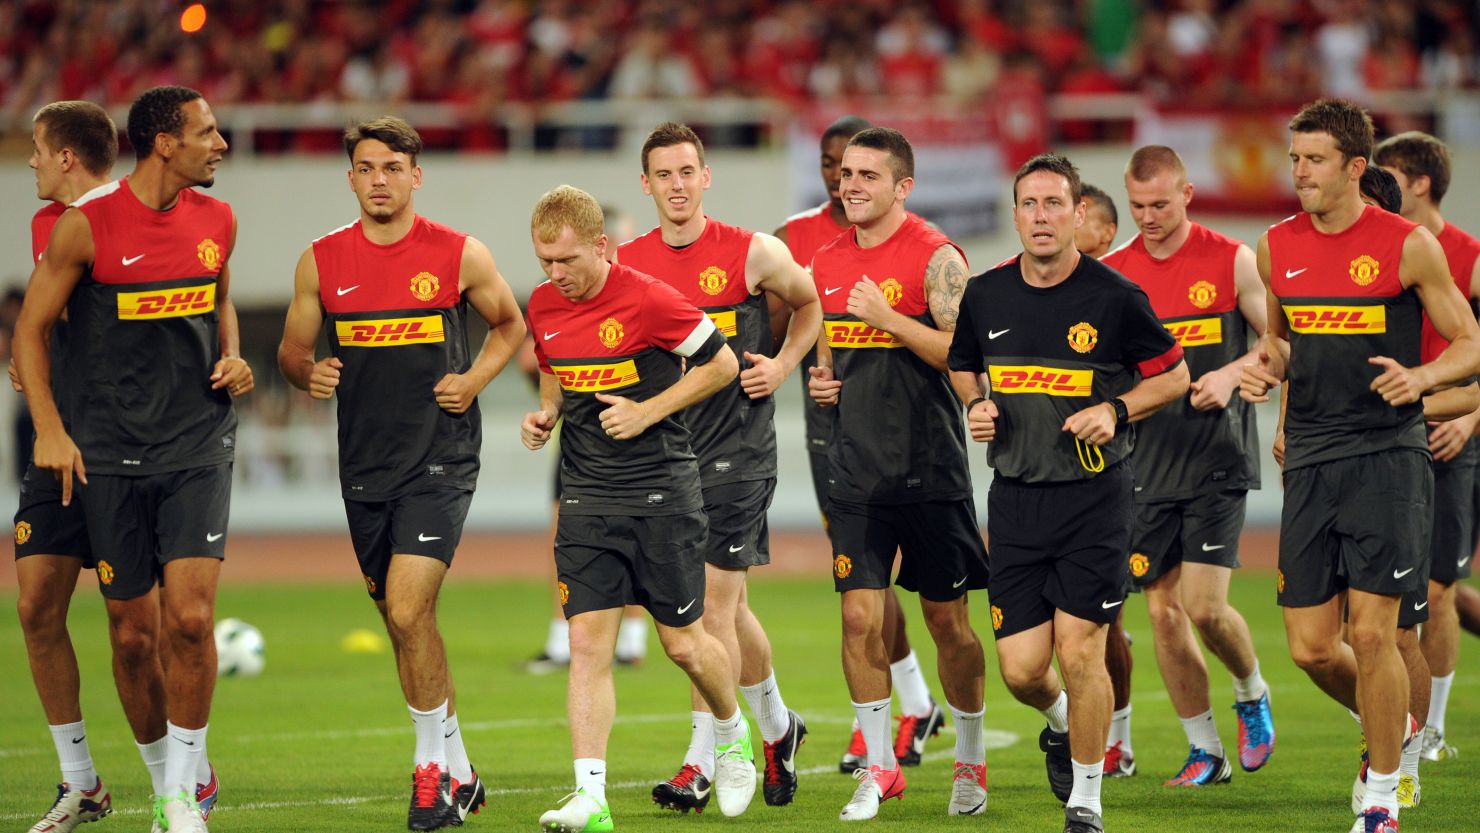 Manchester United's $64 million training kit sponsorship deal with DHL was agreed in 2010.